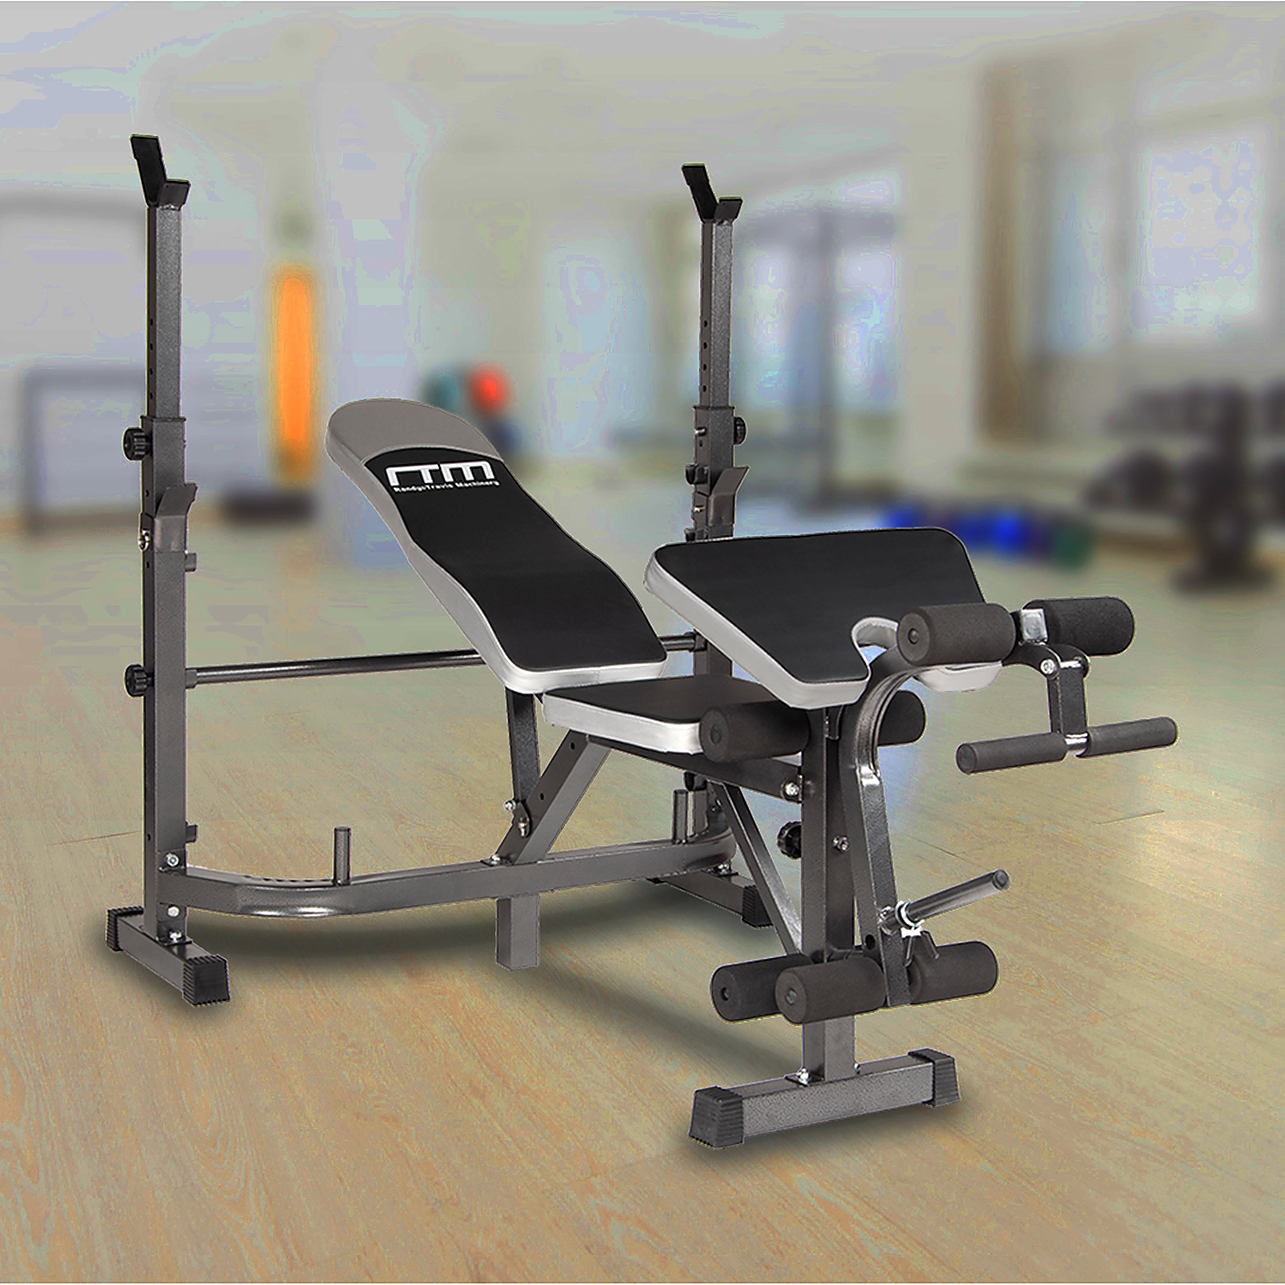 Full Body Home Gym System Exercise Equipment Weight Workout